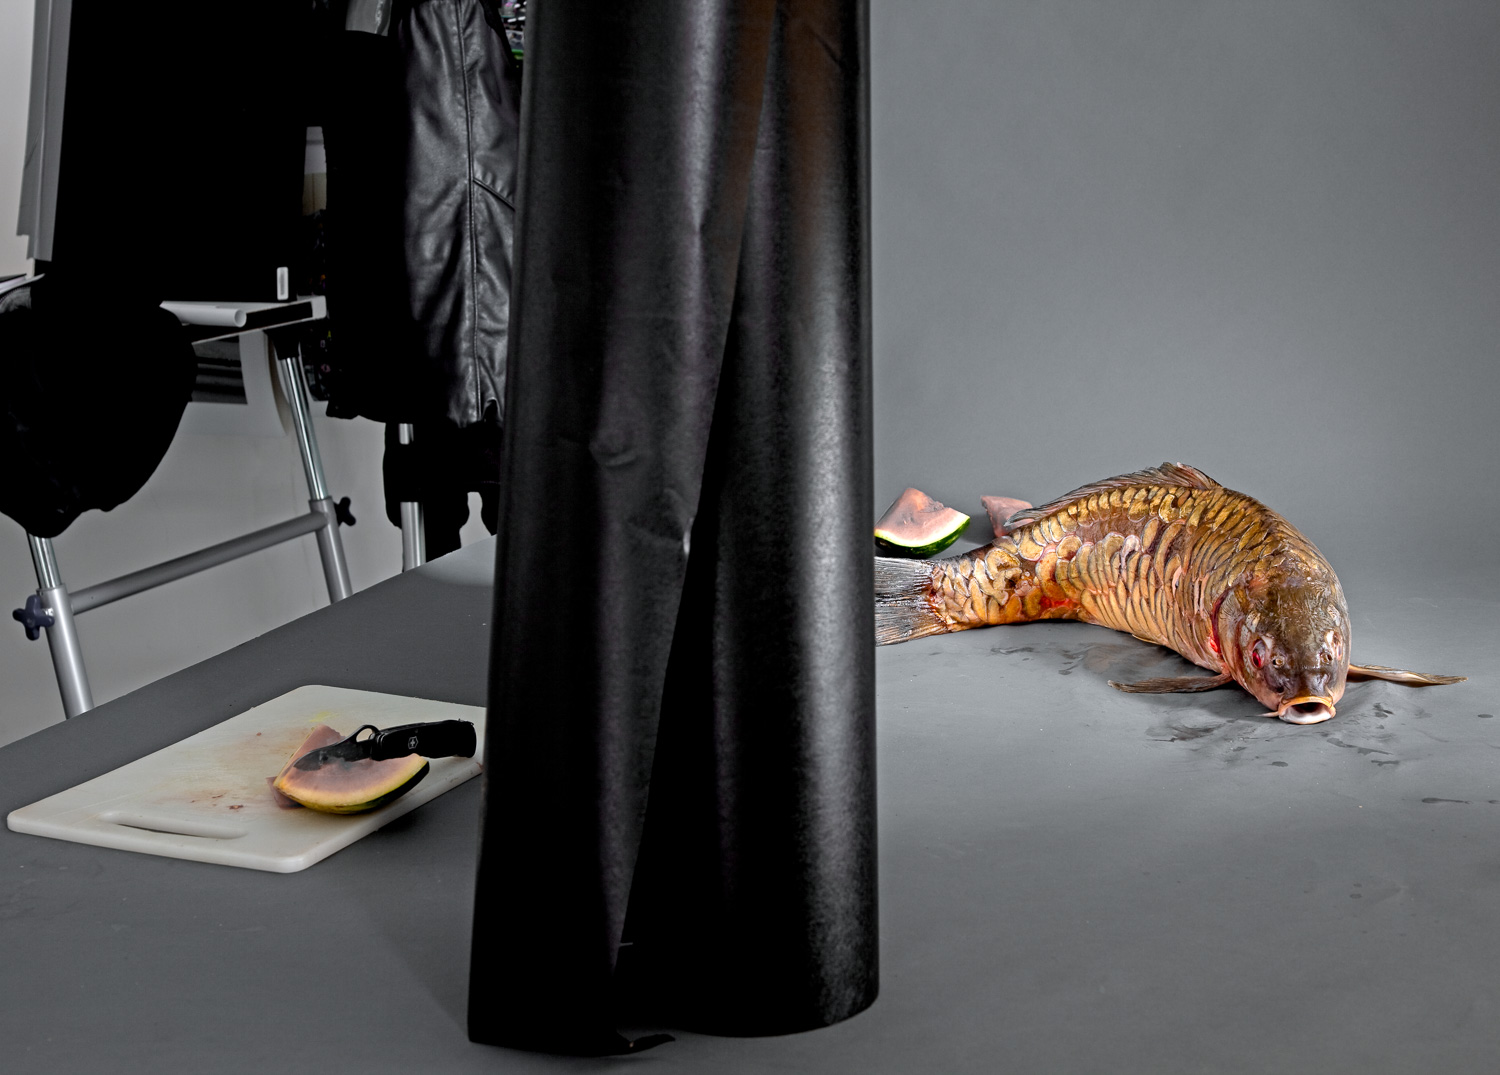 A Carp on my studio table before the final arrangement for a picture.